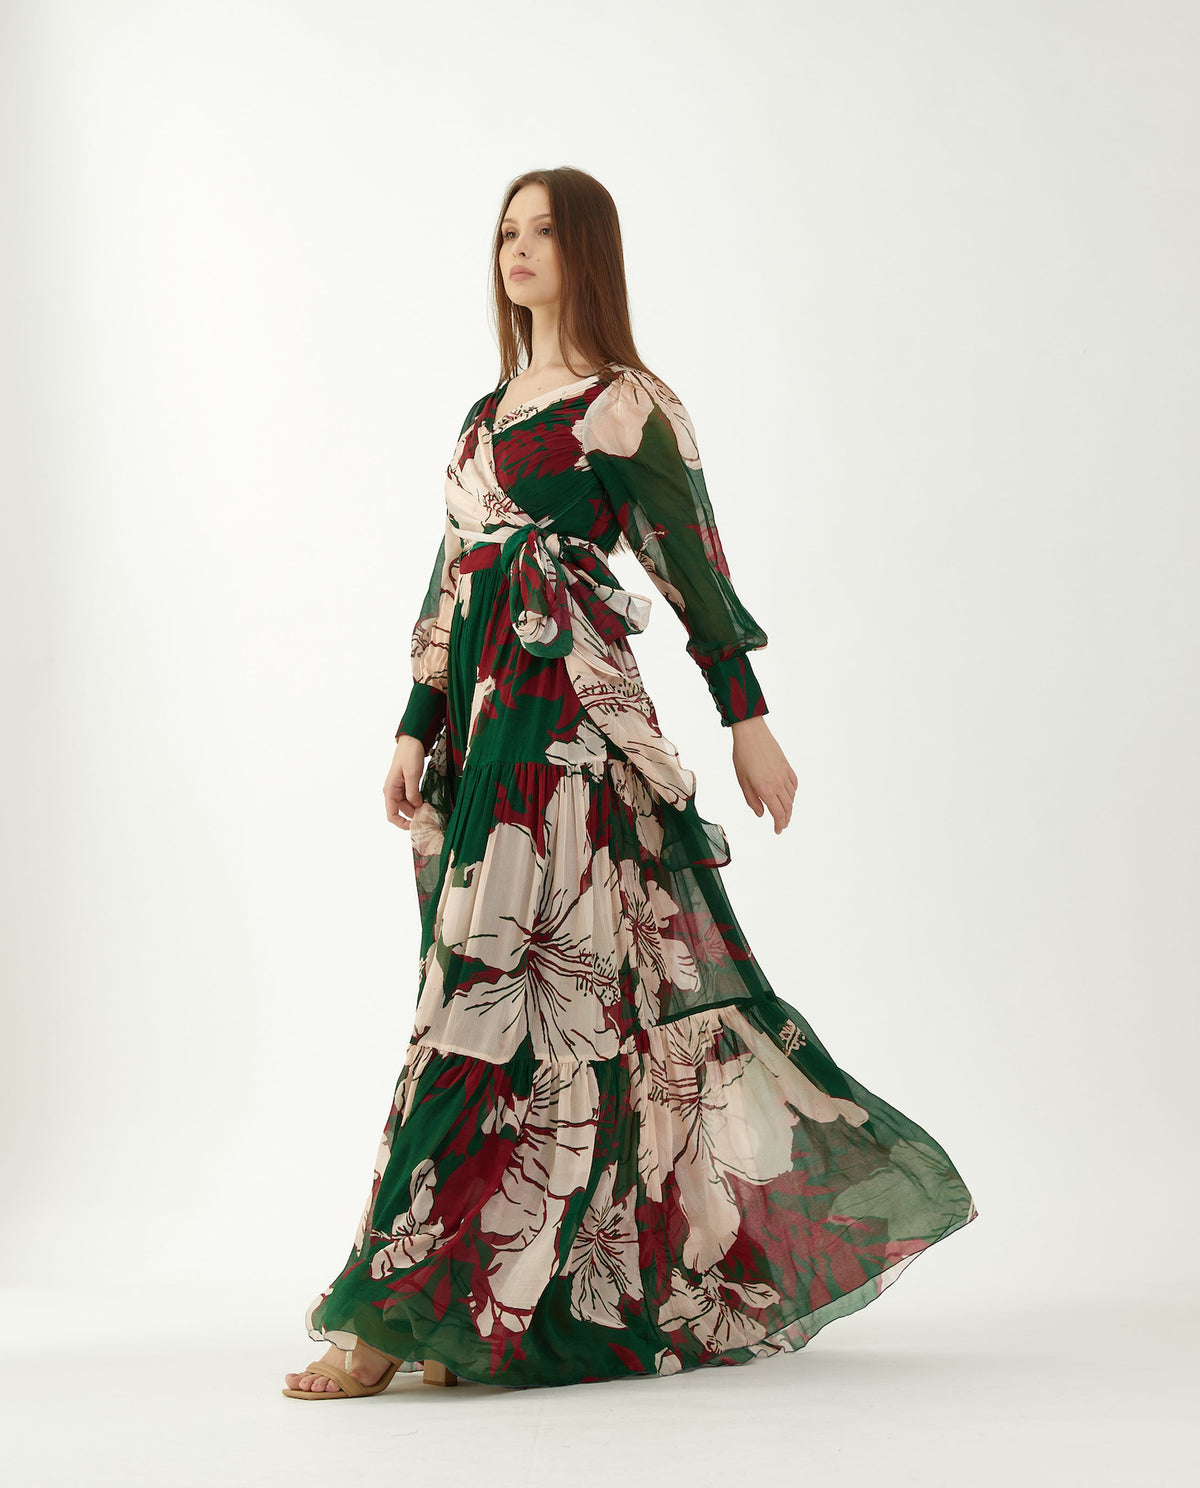 GREEN, RED AND OFFWHITE LONG FLORAL DRESS